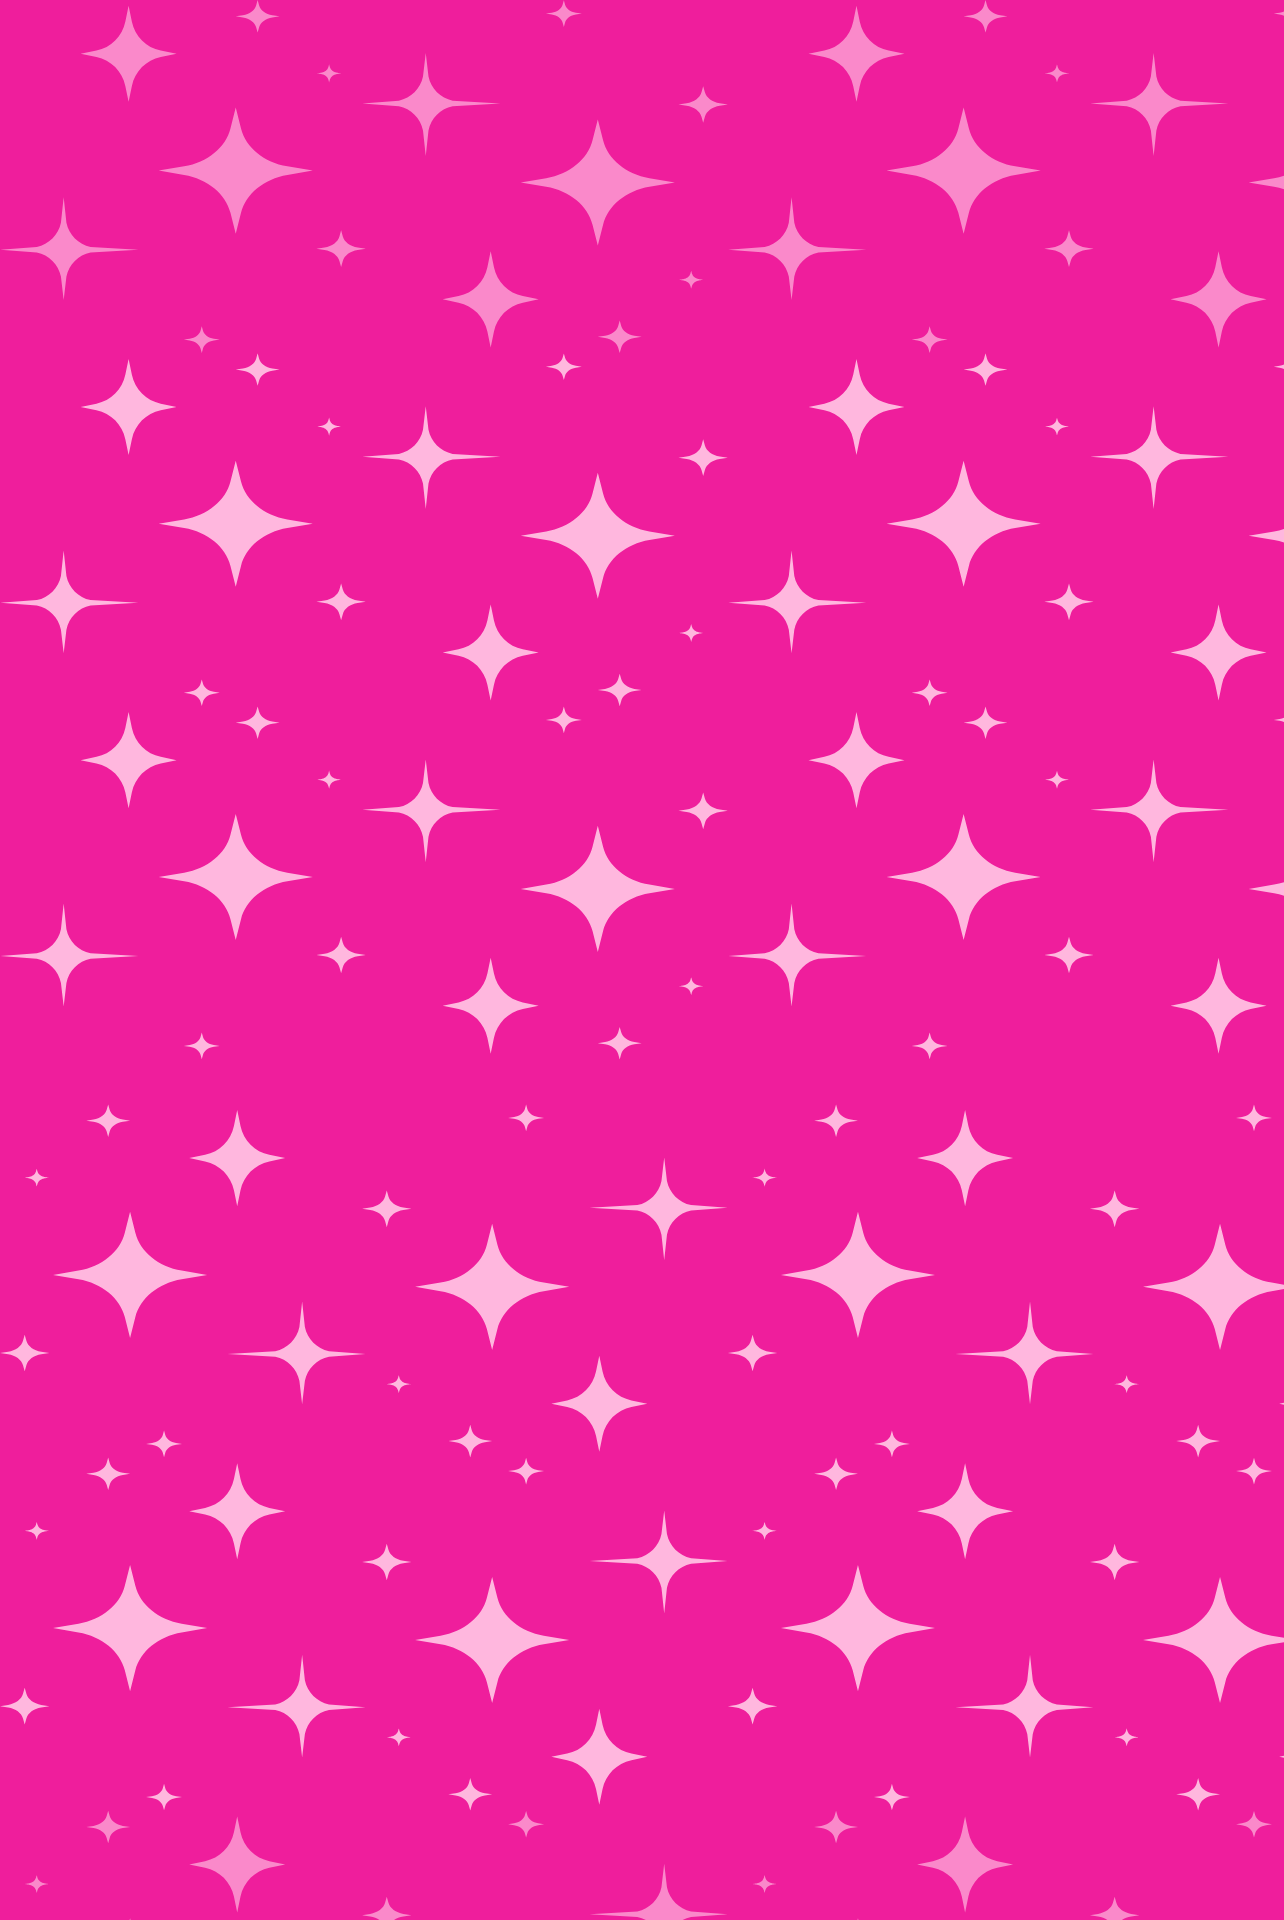 Pink starry background for gift vouchers